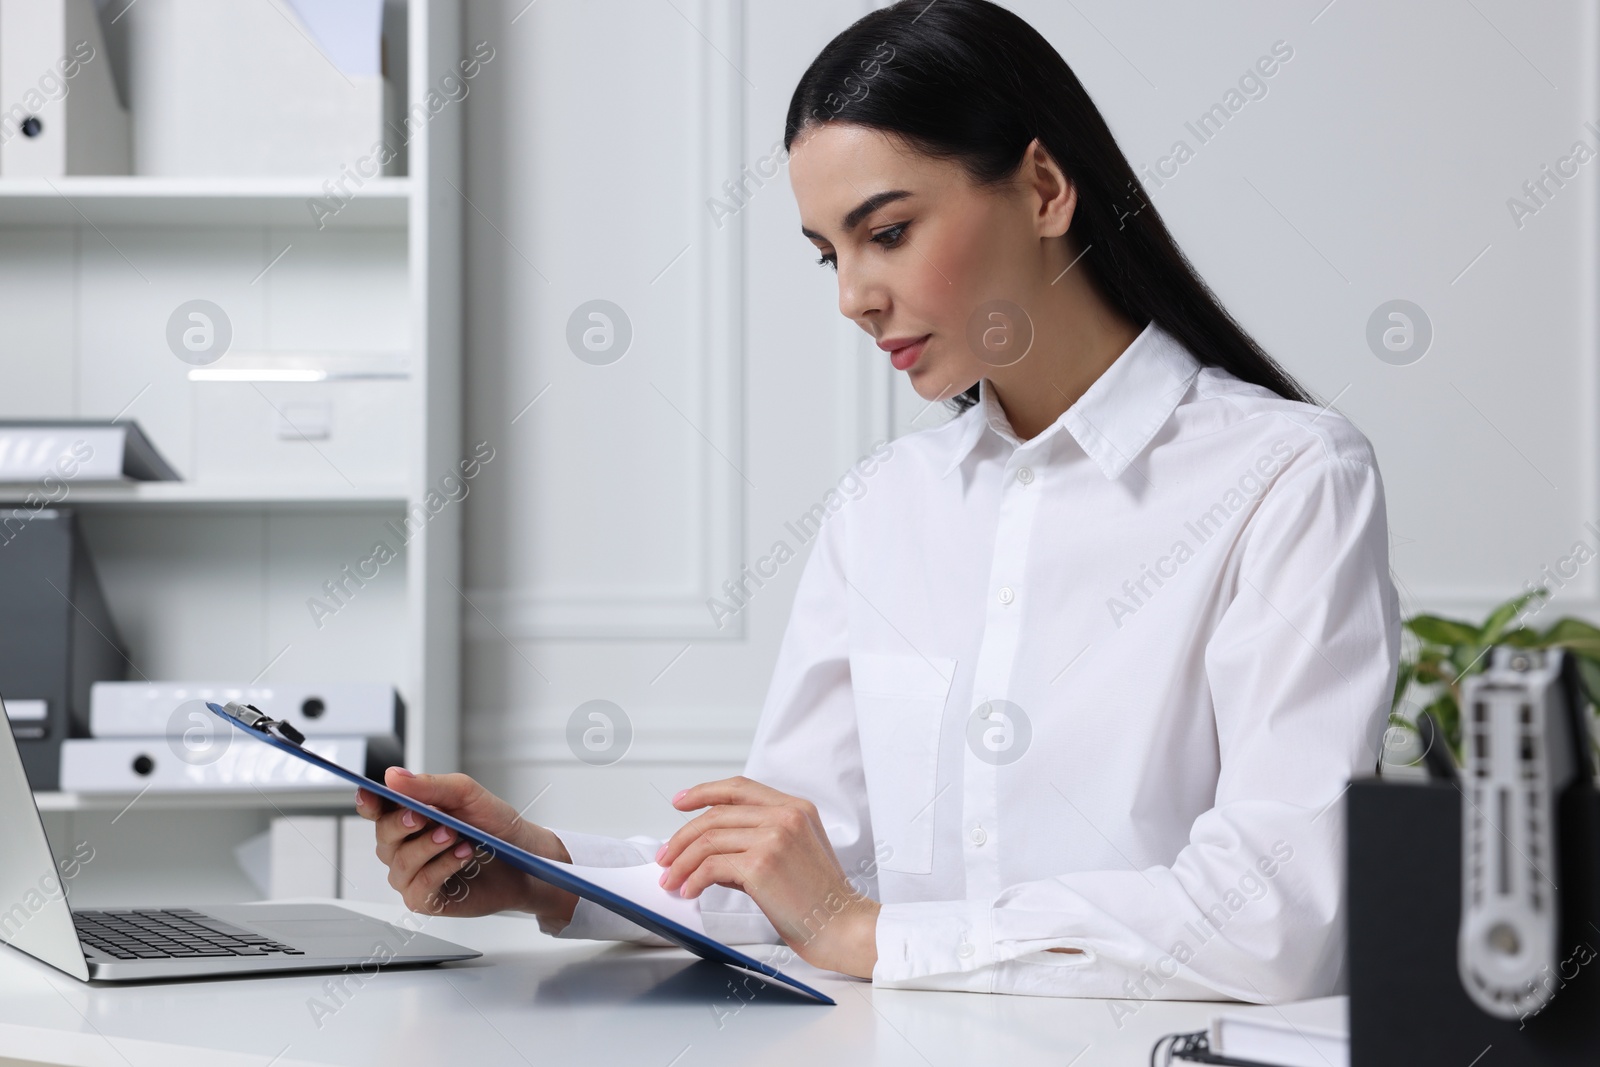 Photo of Human resources manager reading applicant's resume at white table in office